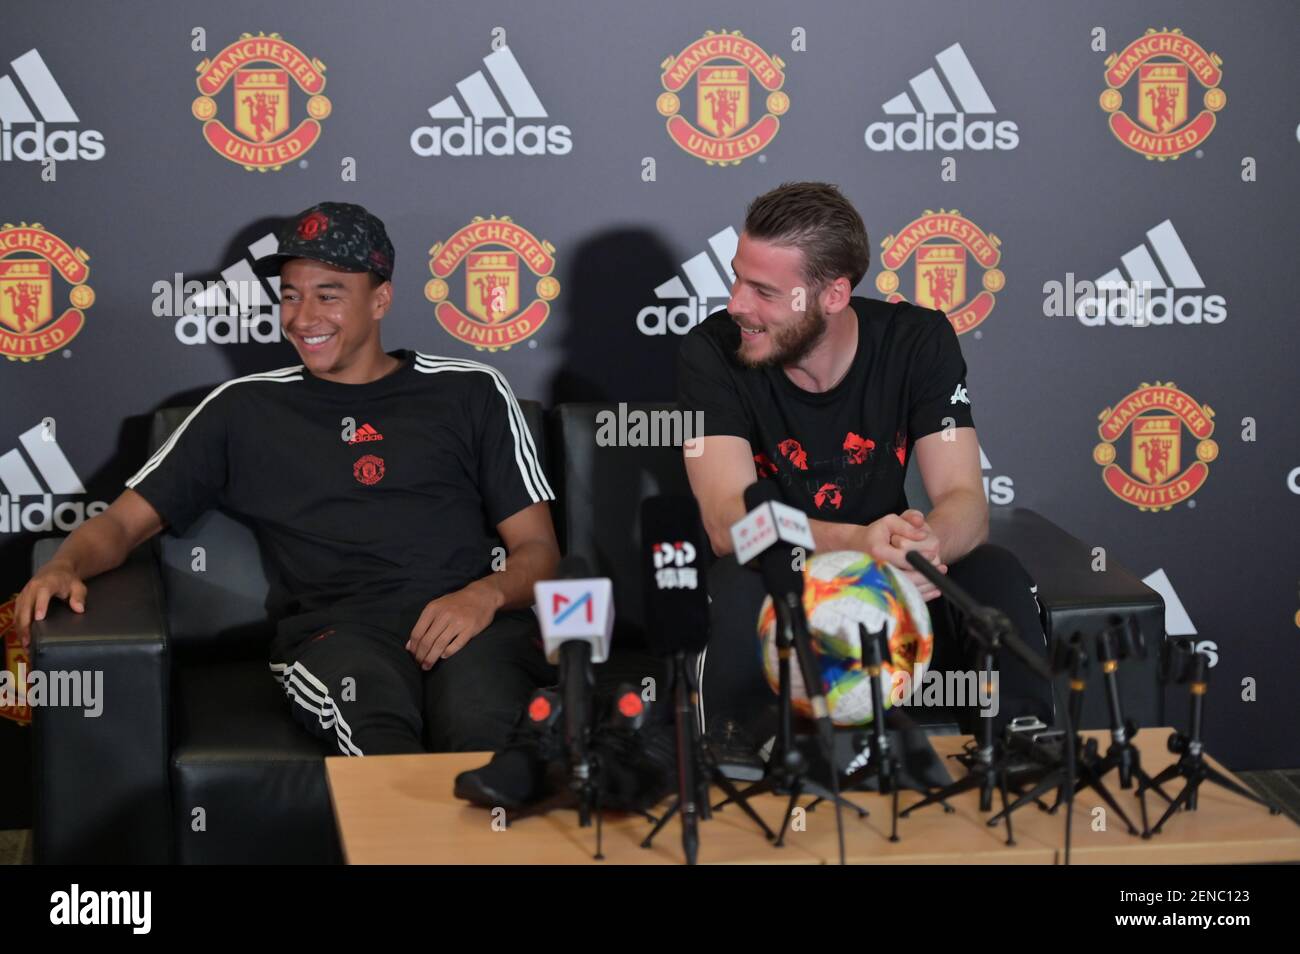 Jesse Lingard, left, Spanish football player David de Gea of Manchester  United F.C. of Premier League attend a promotional event for adidas during  2019 pre-season tour in Shanghai, China, 23 July 2019. (